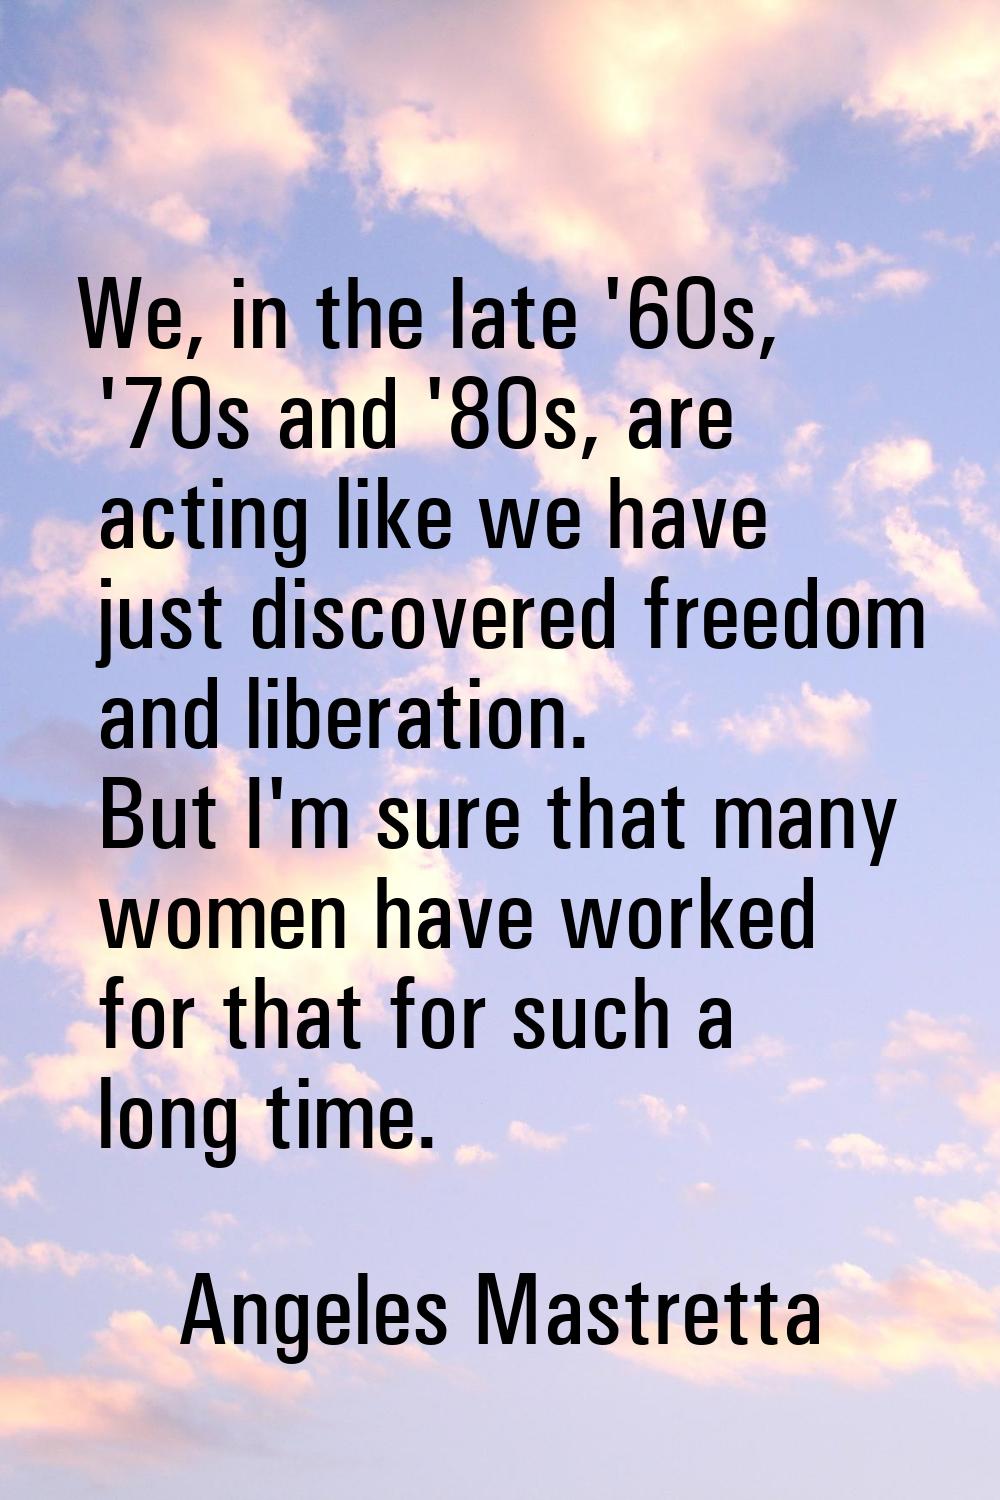 We, in the late '60s, '70s and '80s, are acting like we have just discovered freedom and liberation